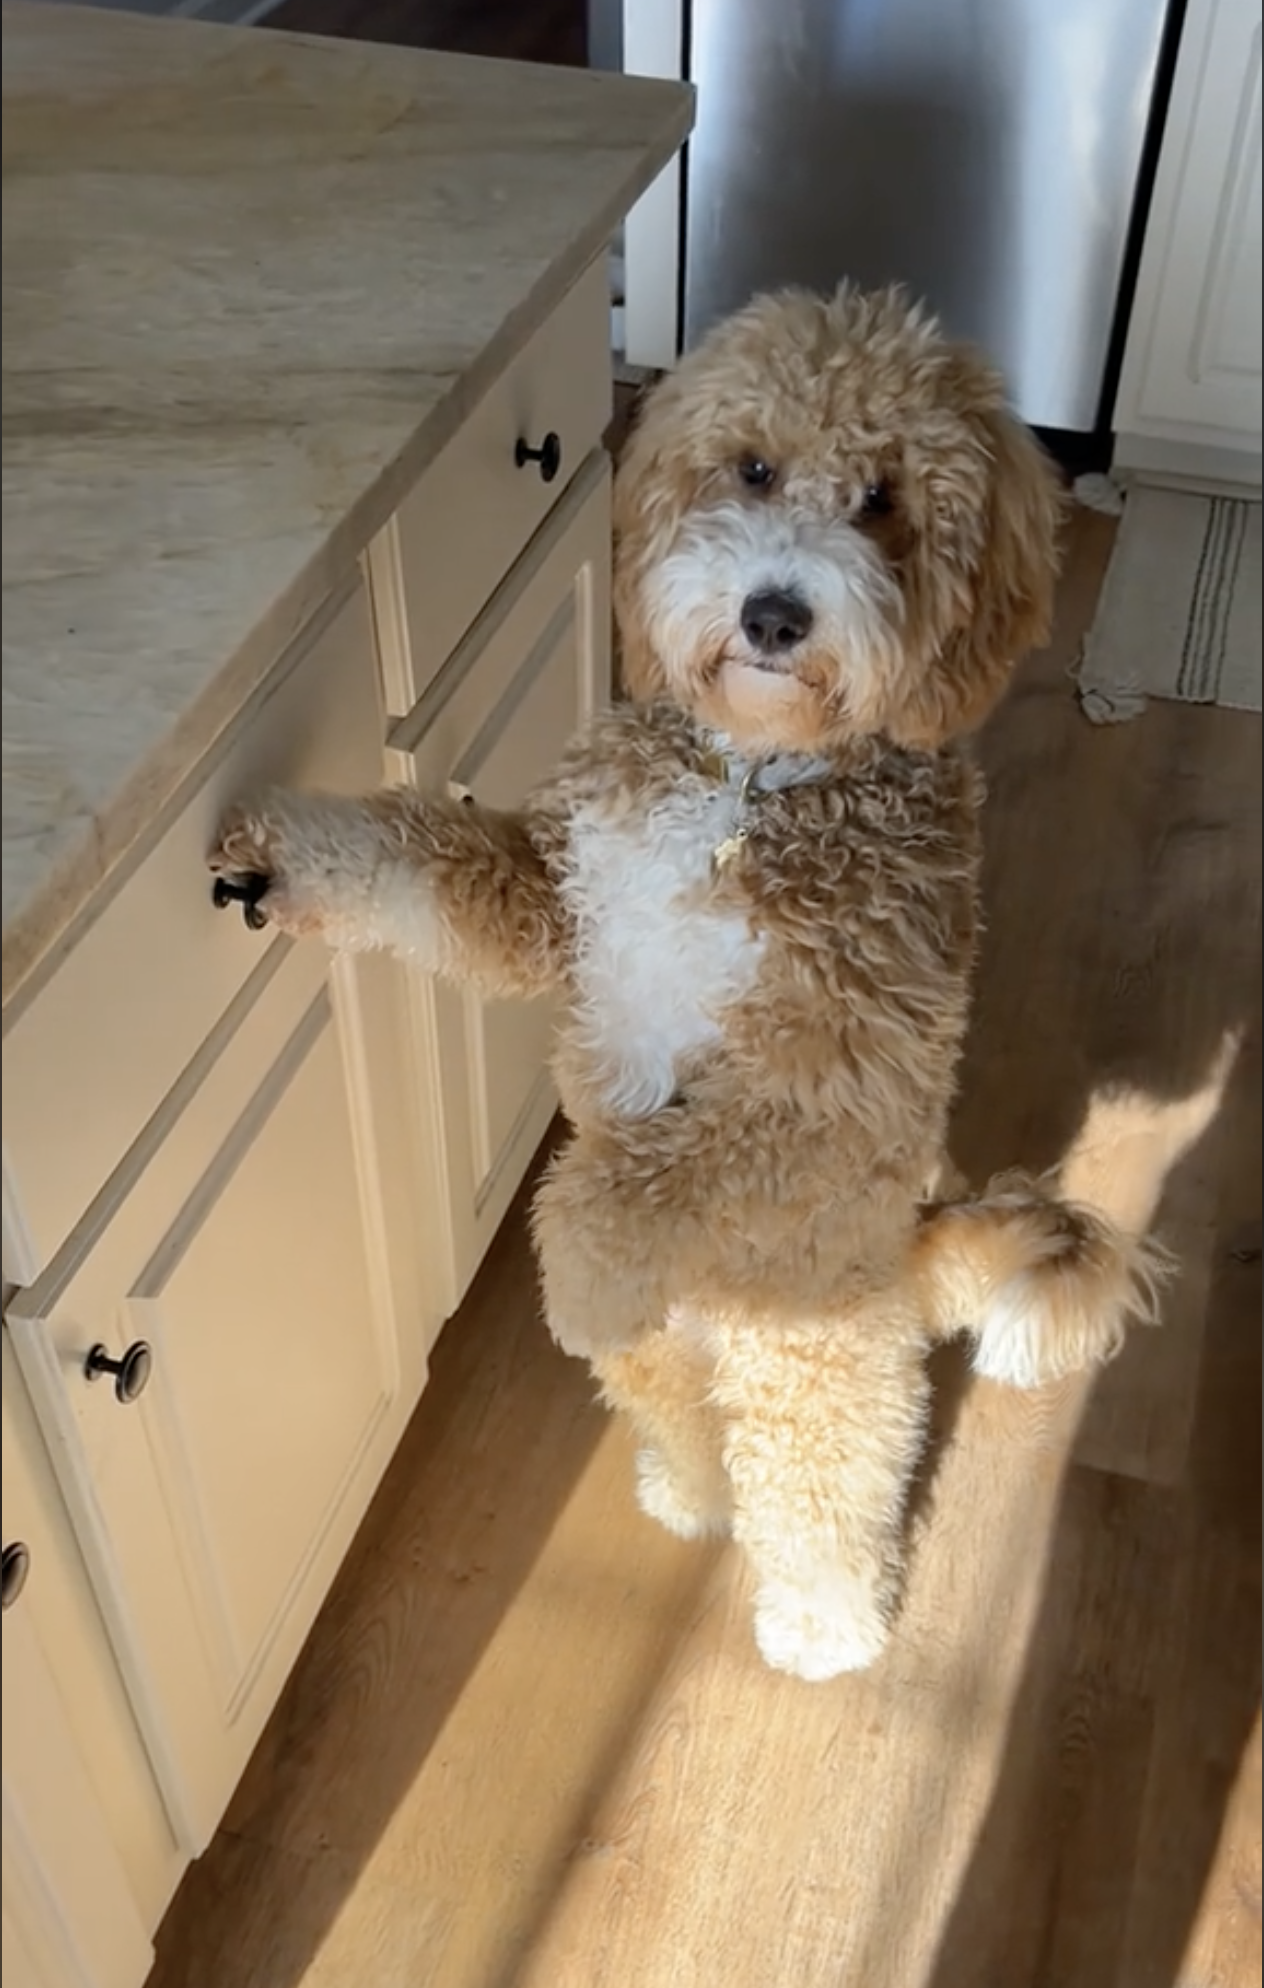 The Pawsitively Adorable Goldendoodle Taking TikTok by Storm